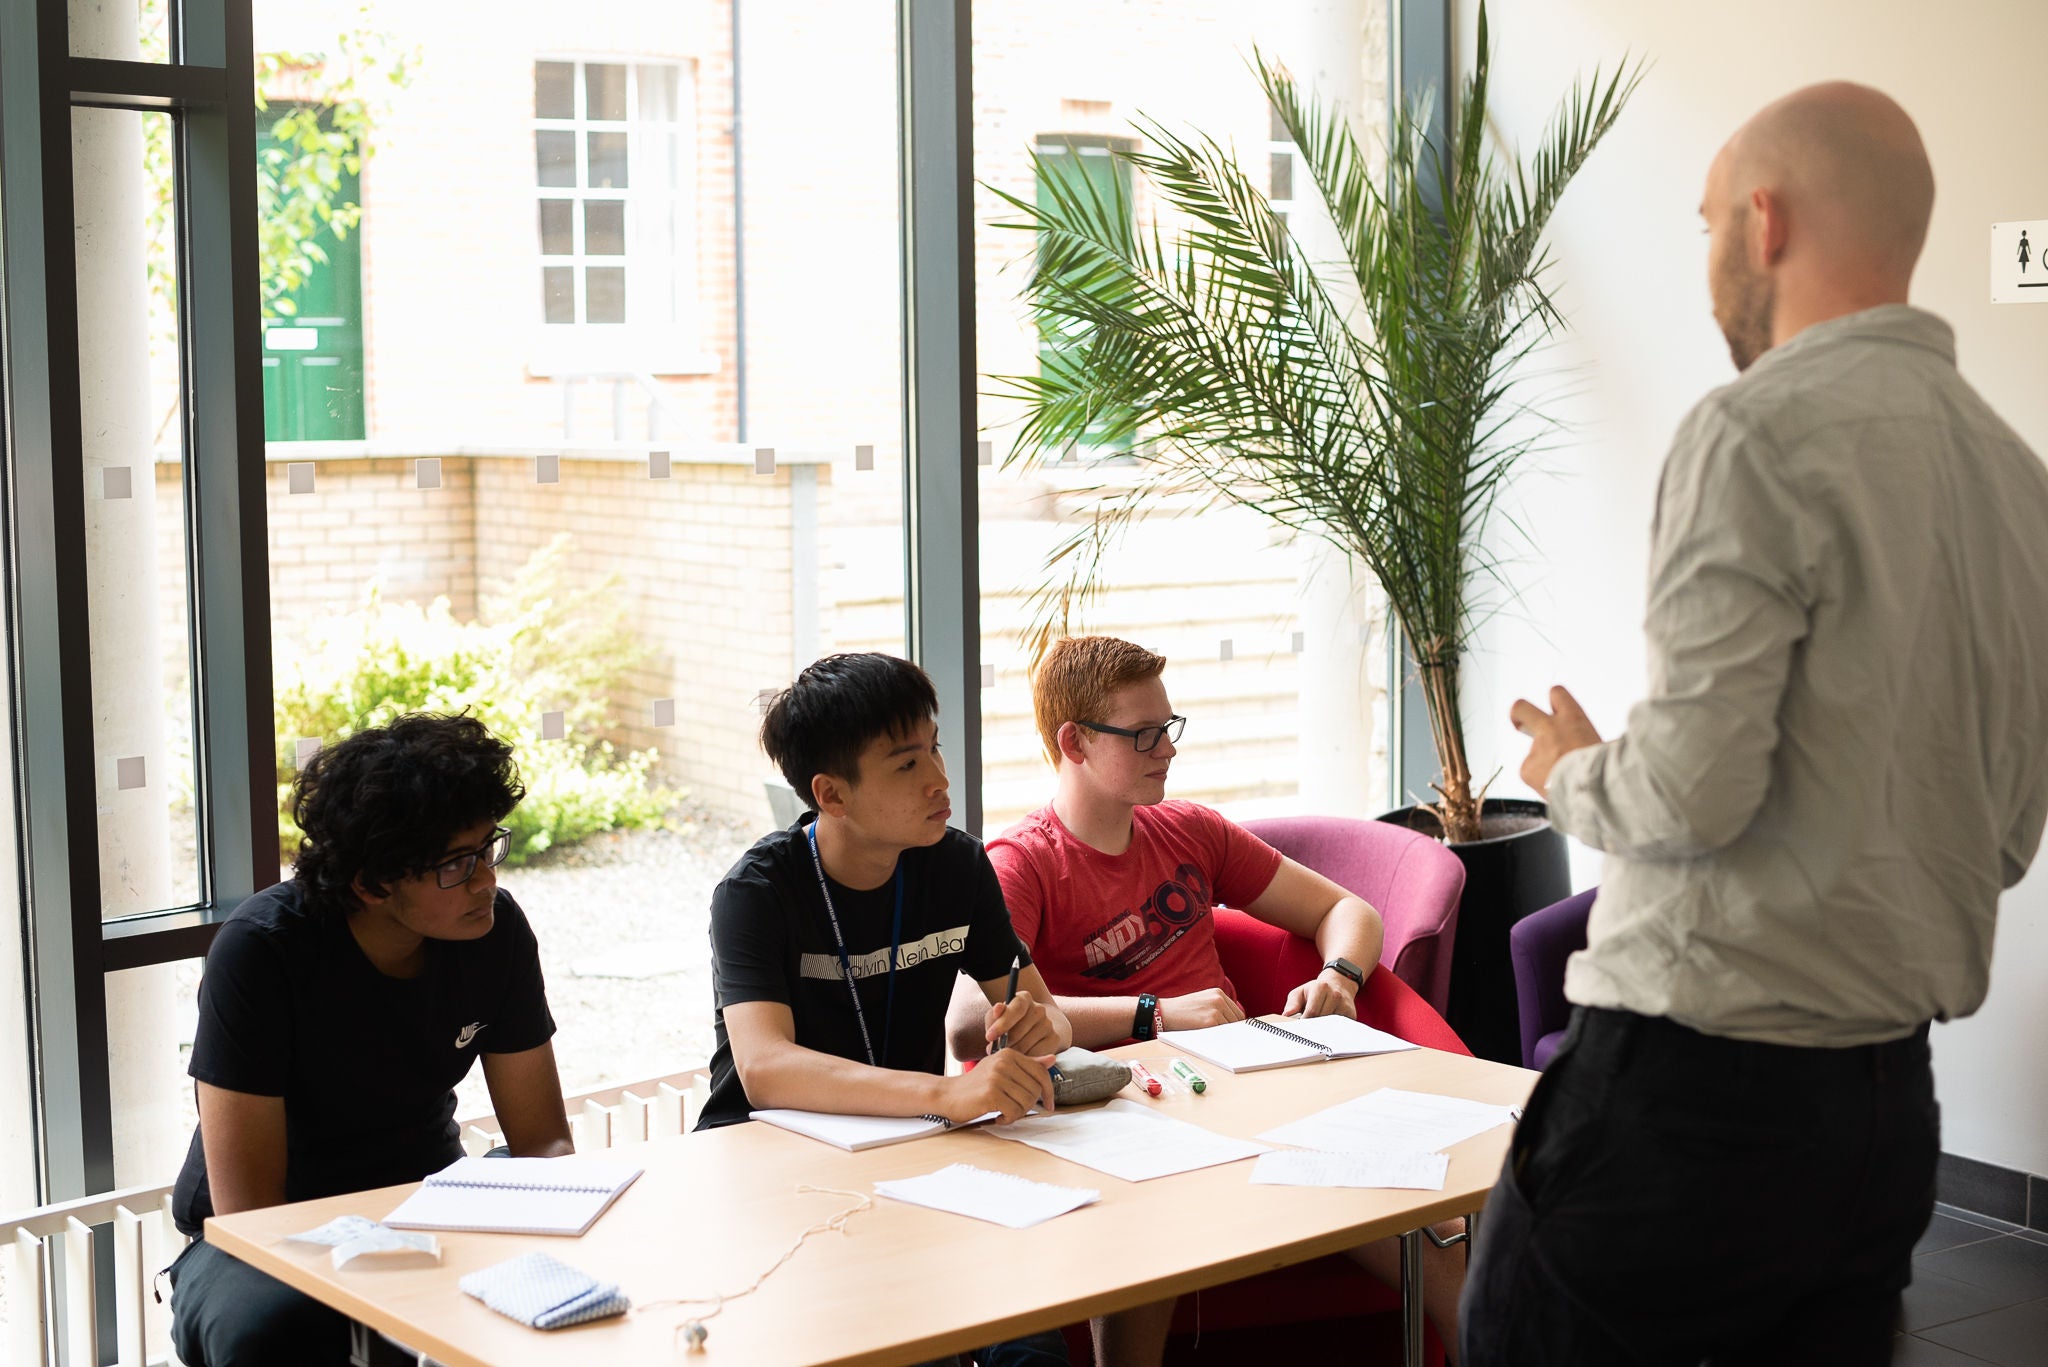 Summer school students learn from expert Oxford and Cambridge graduate tutors